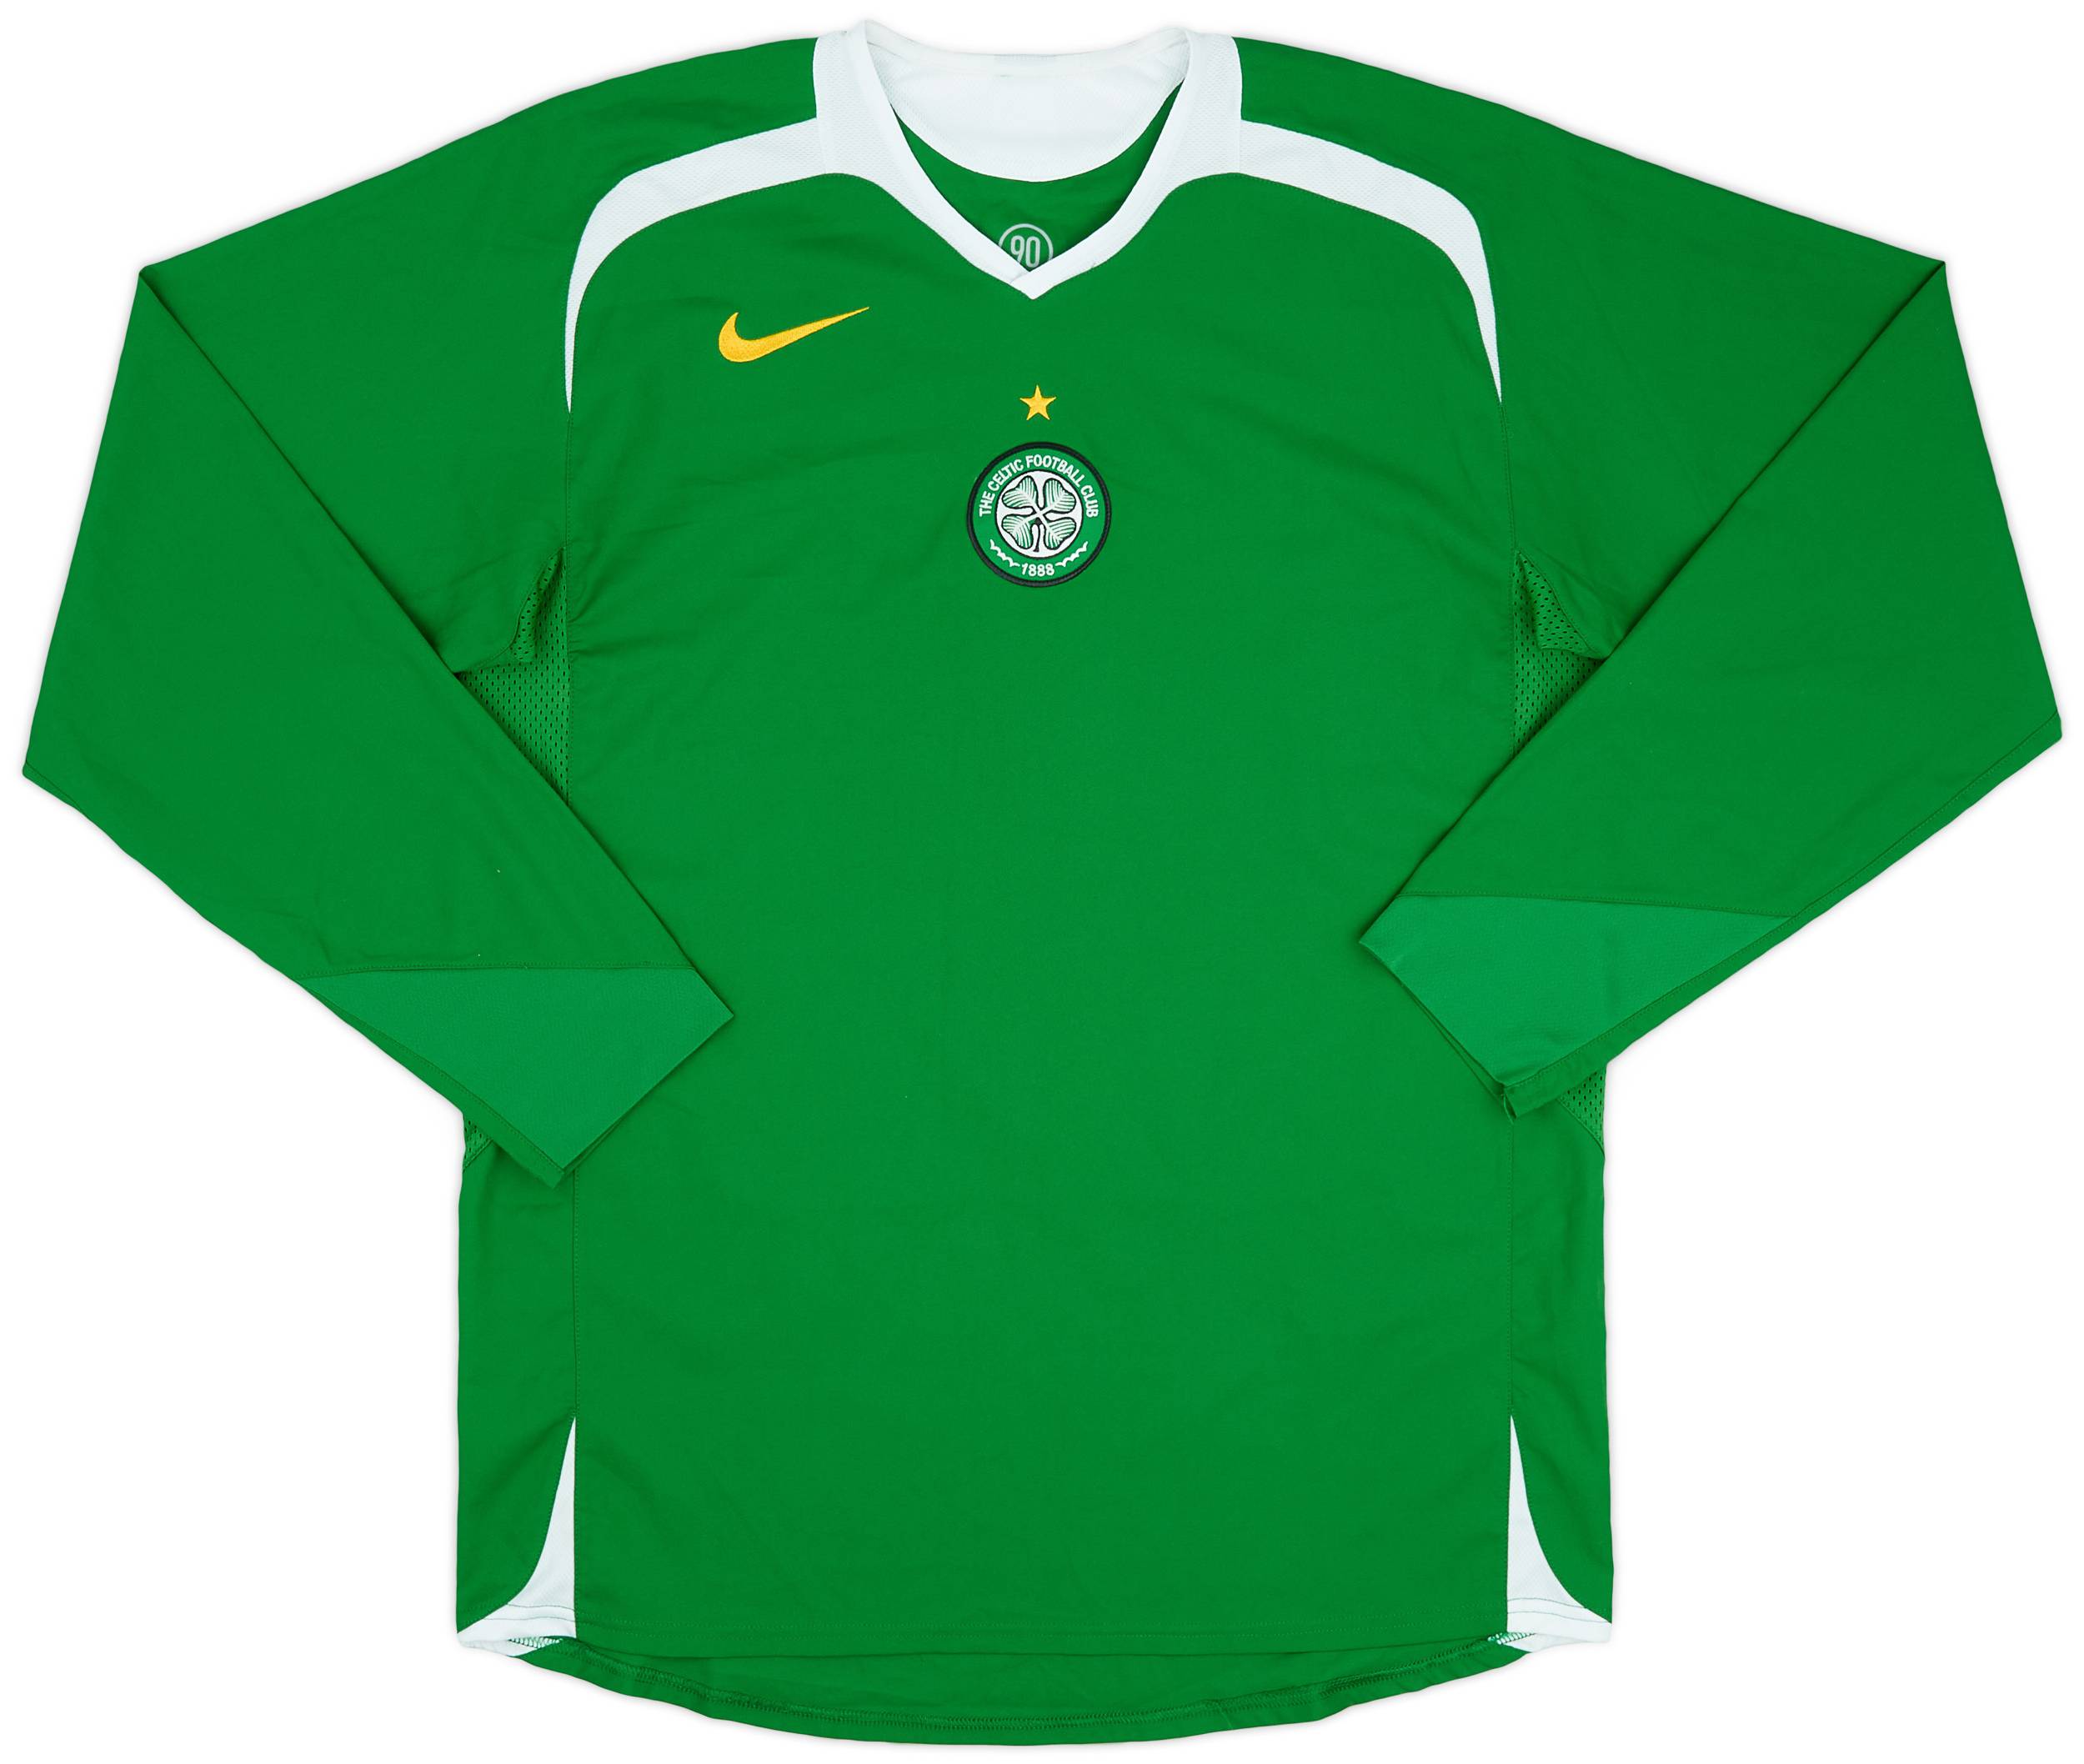 2005-06 Celtic Player Issue Away L/S Shirt - 9/10 - (L)